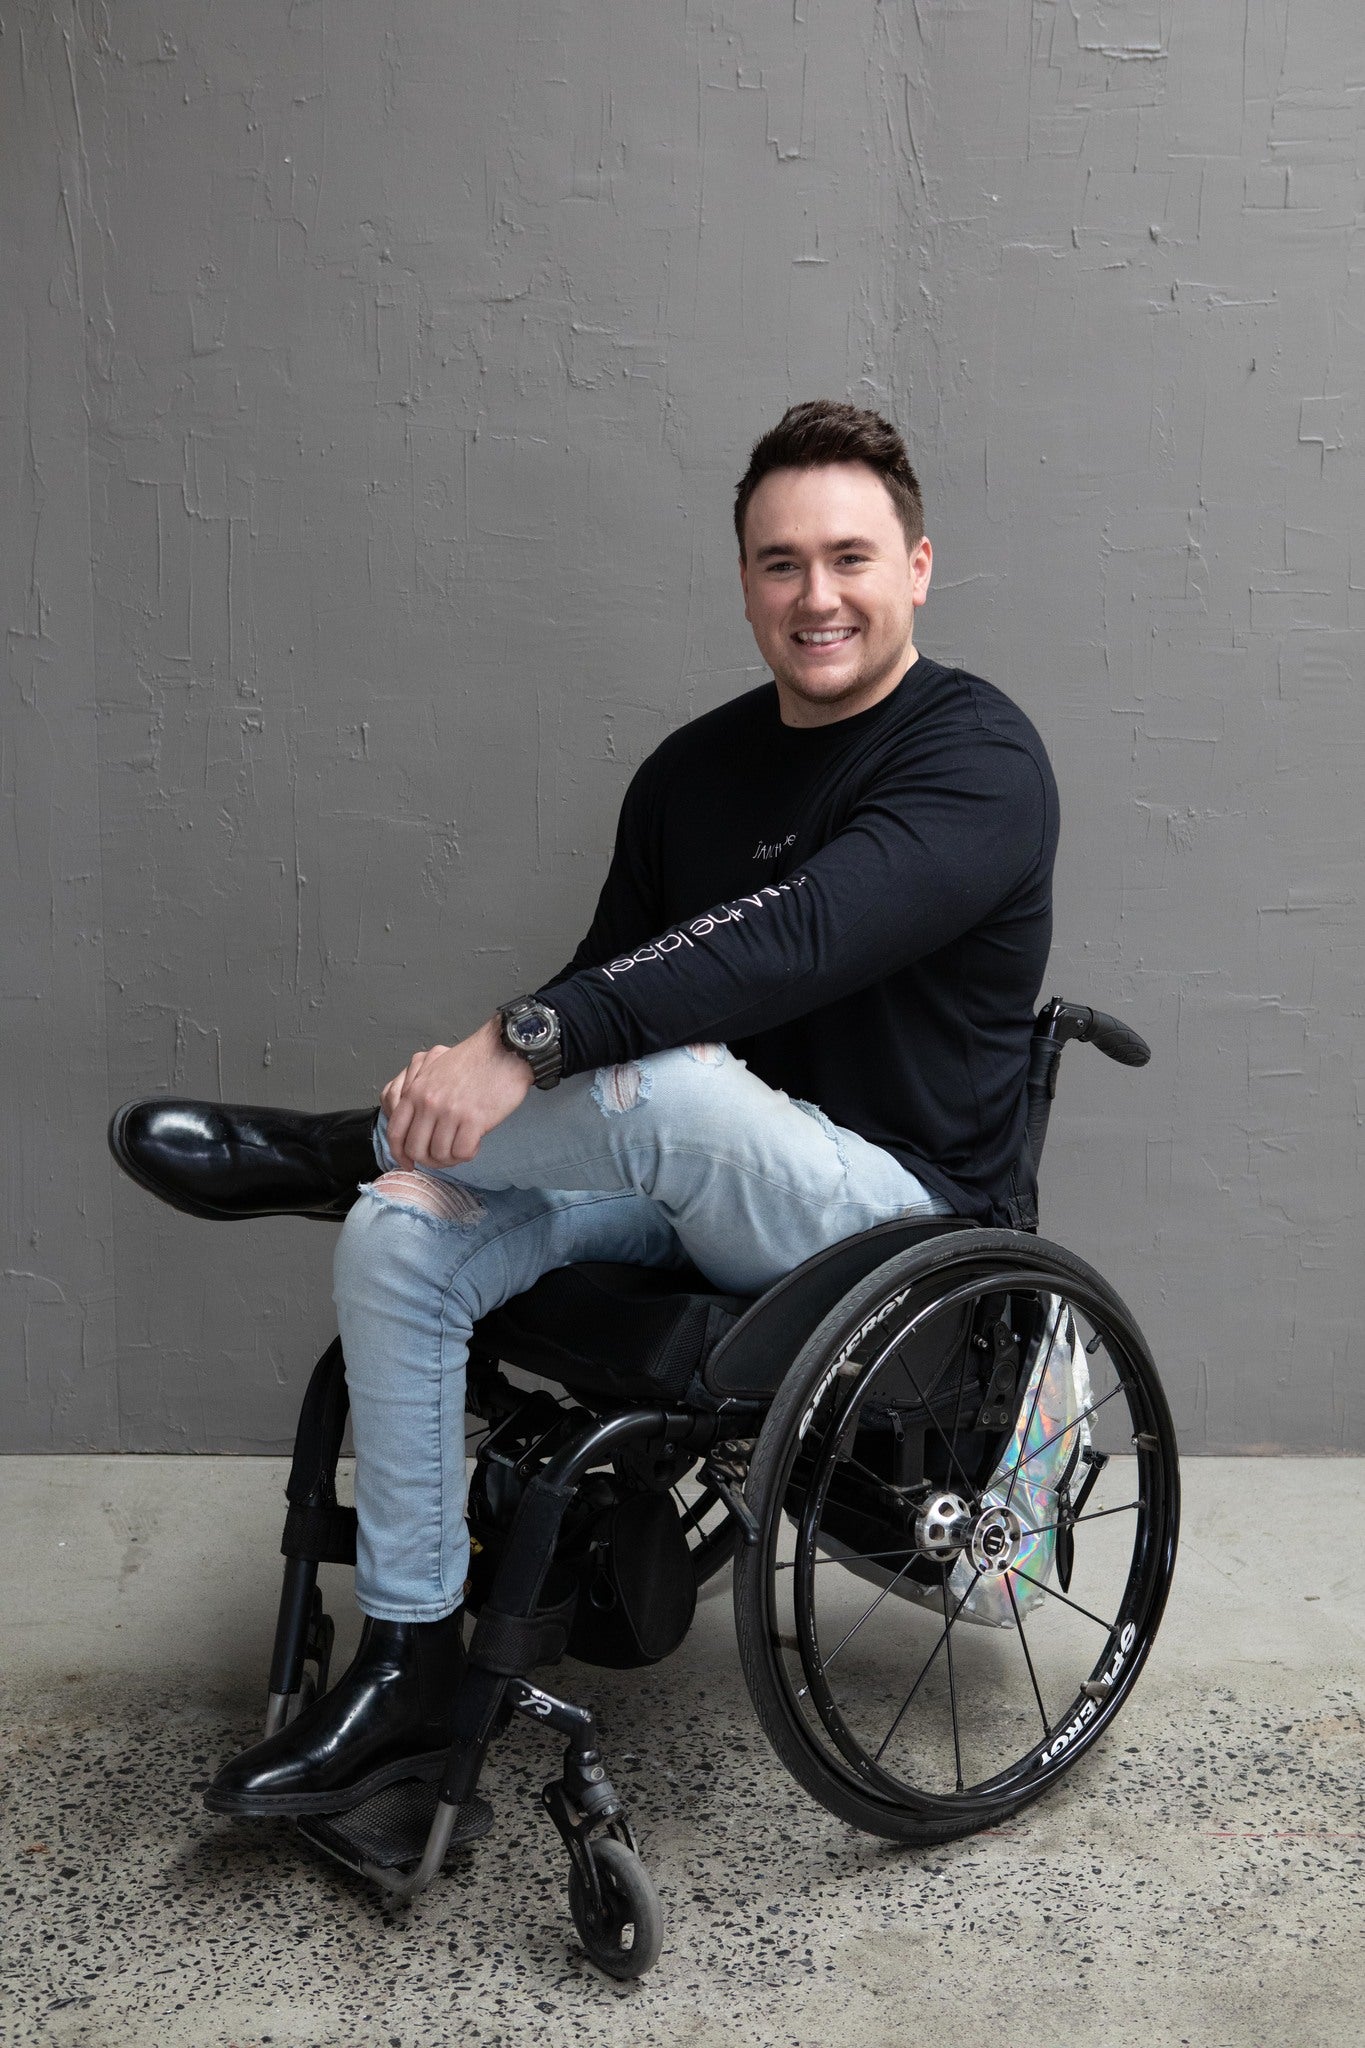 Jason, a white man with short brown hair, is sitting in his wheelchair and smiling. He is wearing a black long sleeve with the words "JAM the label" down the sleeve, ripped light blue jeans and black boots. One leg is crossed over the other. He is against a grey wall and the floor is concrete.